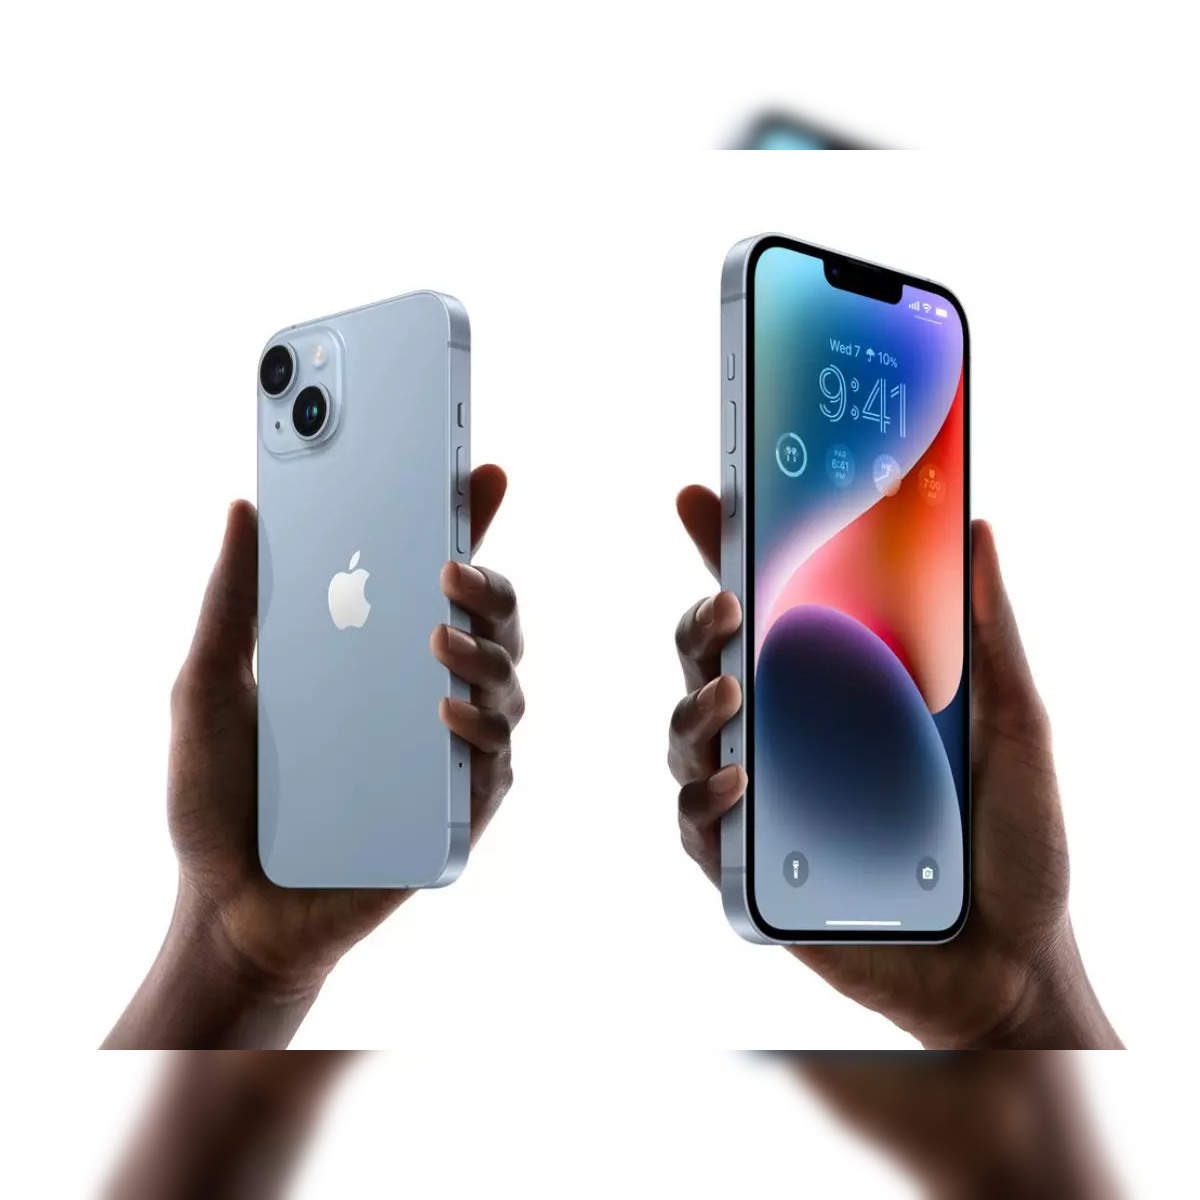 iPhone 11 Price: Apple iPhone 11 now available at 21499, check out these  deals here - The Economic Times